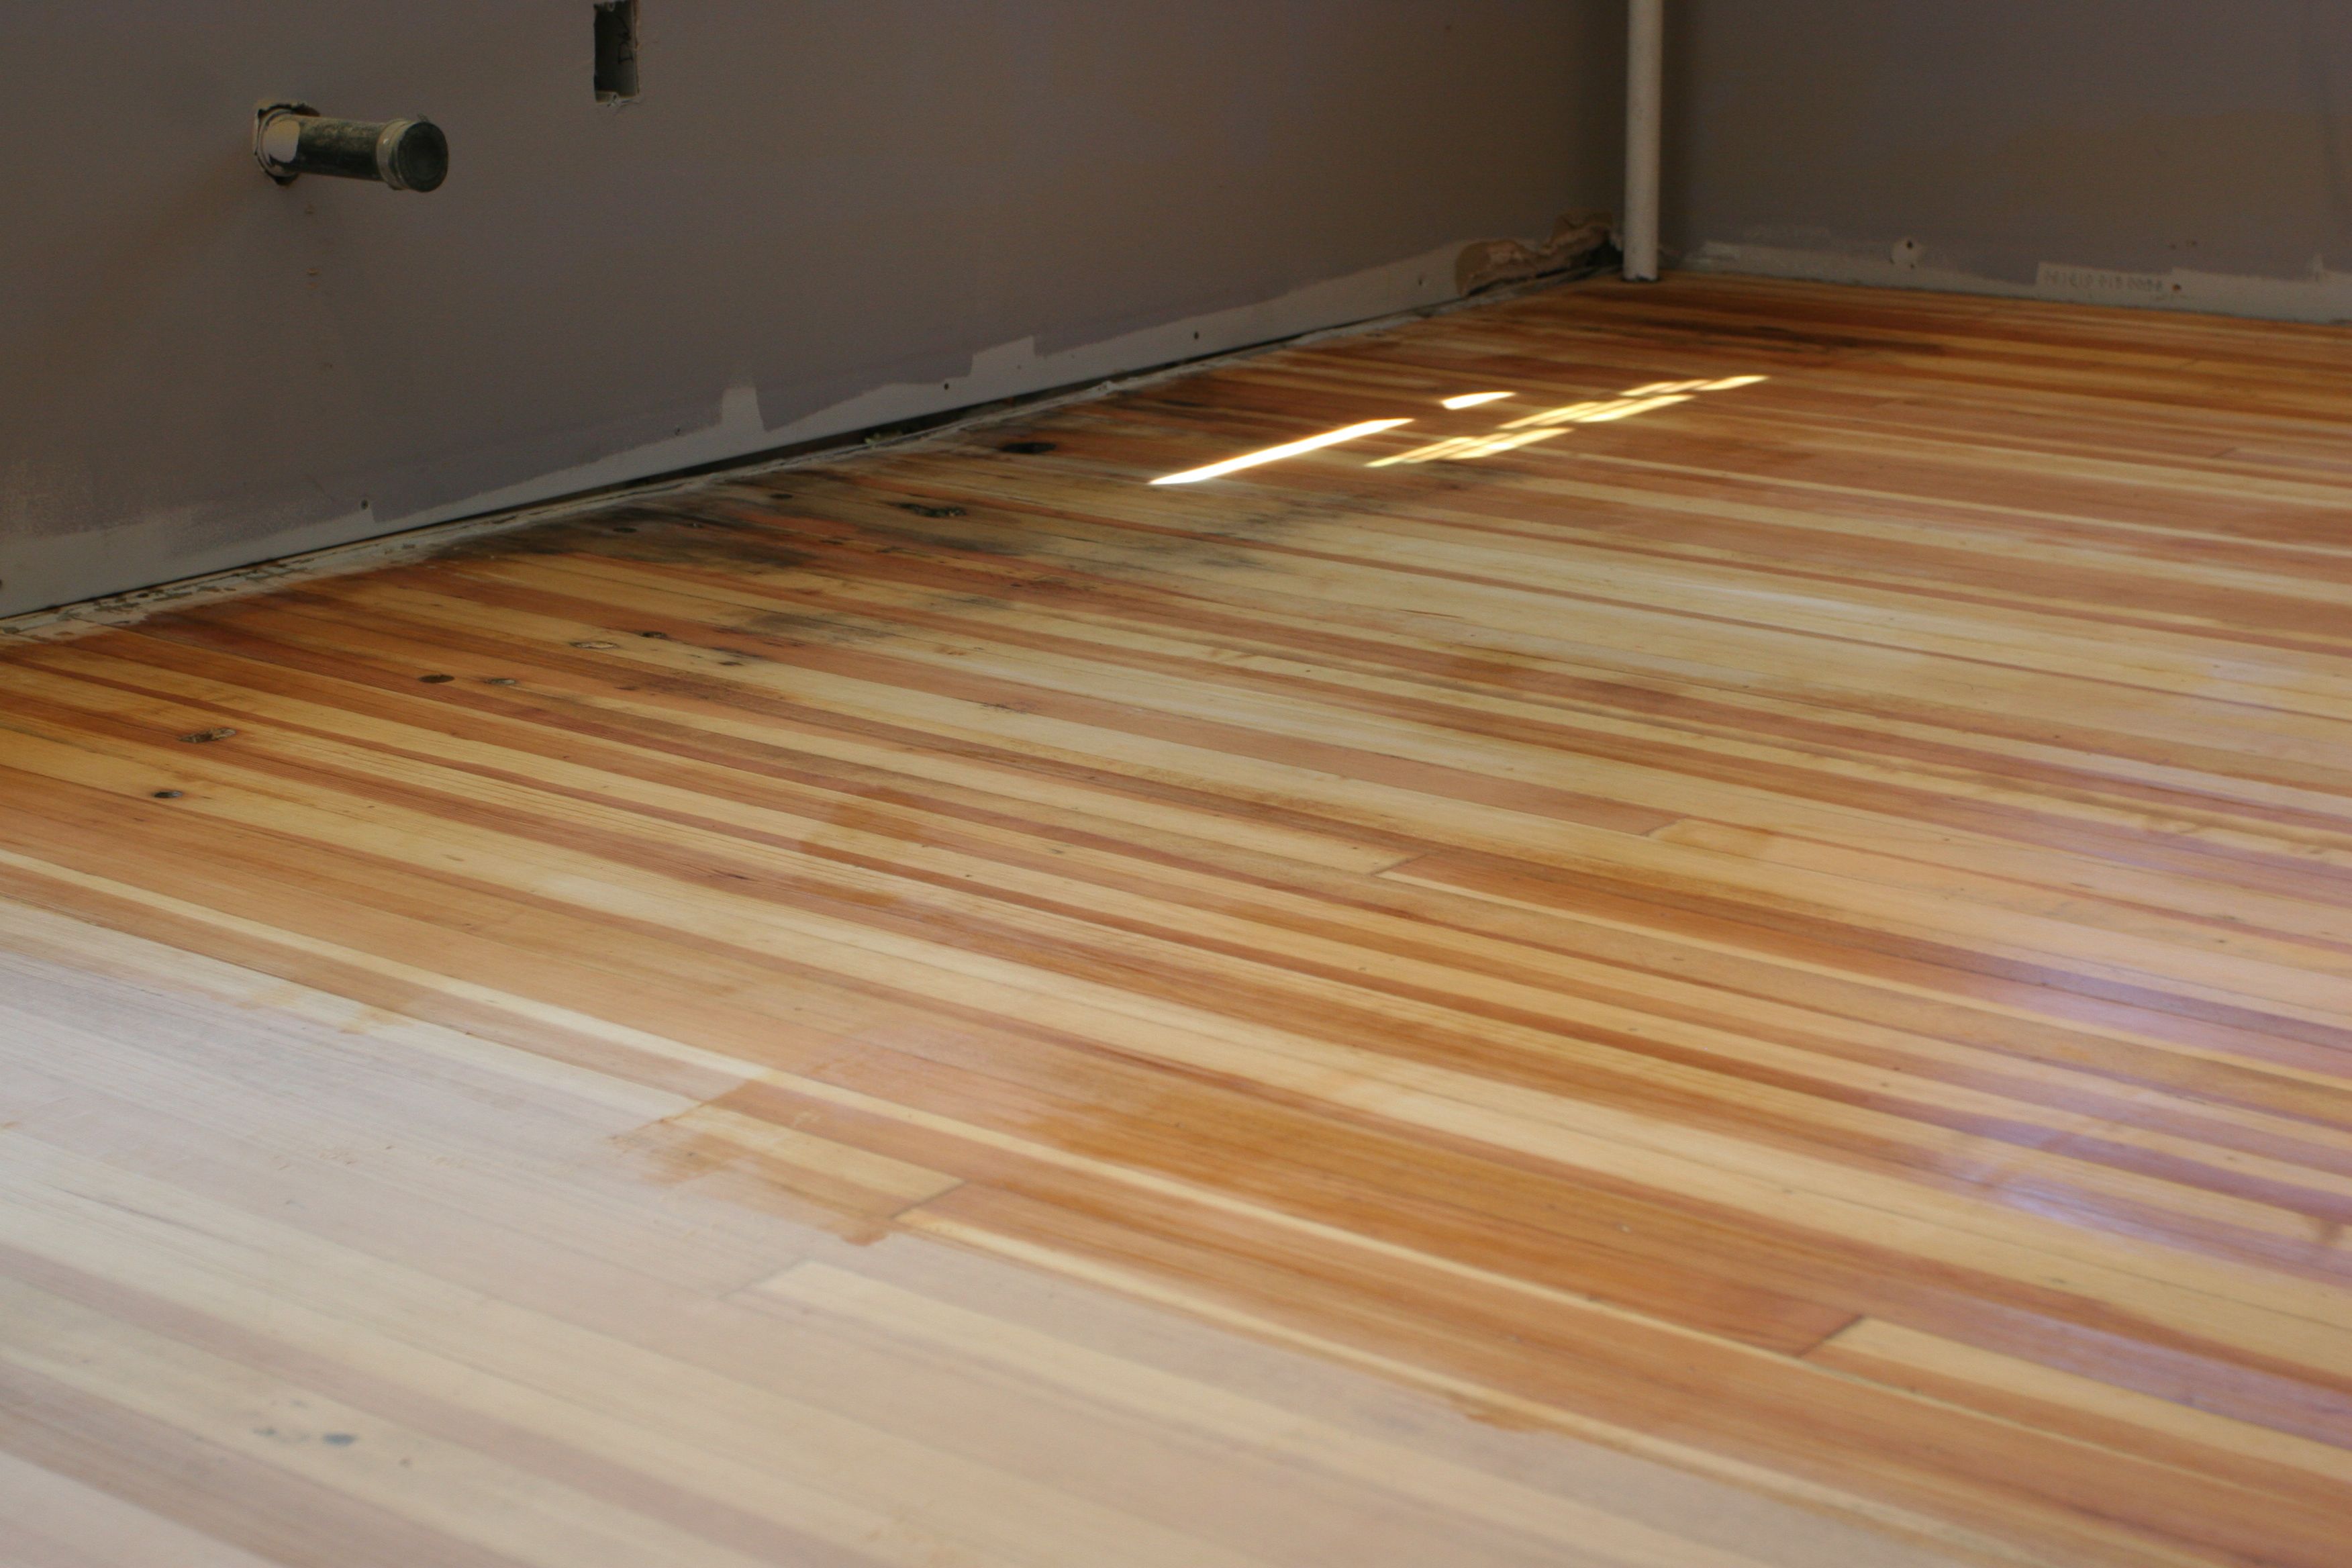 Older floor was denser than the younger floor, so it needed some special preparation to make the stain take evenly.